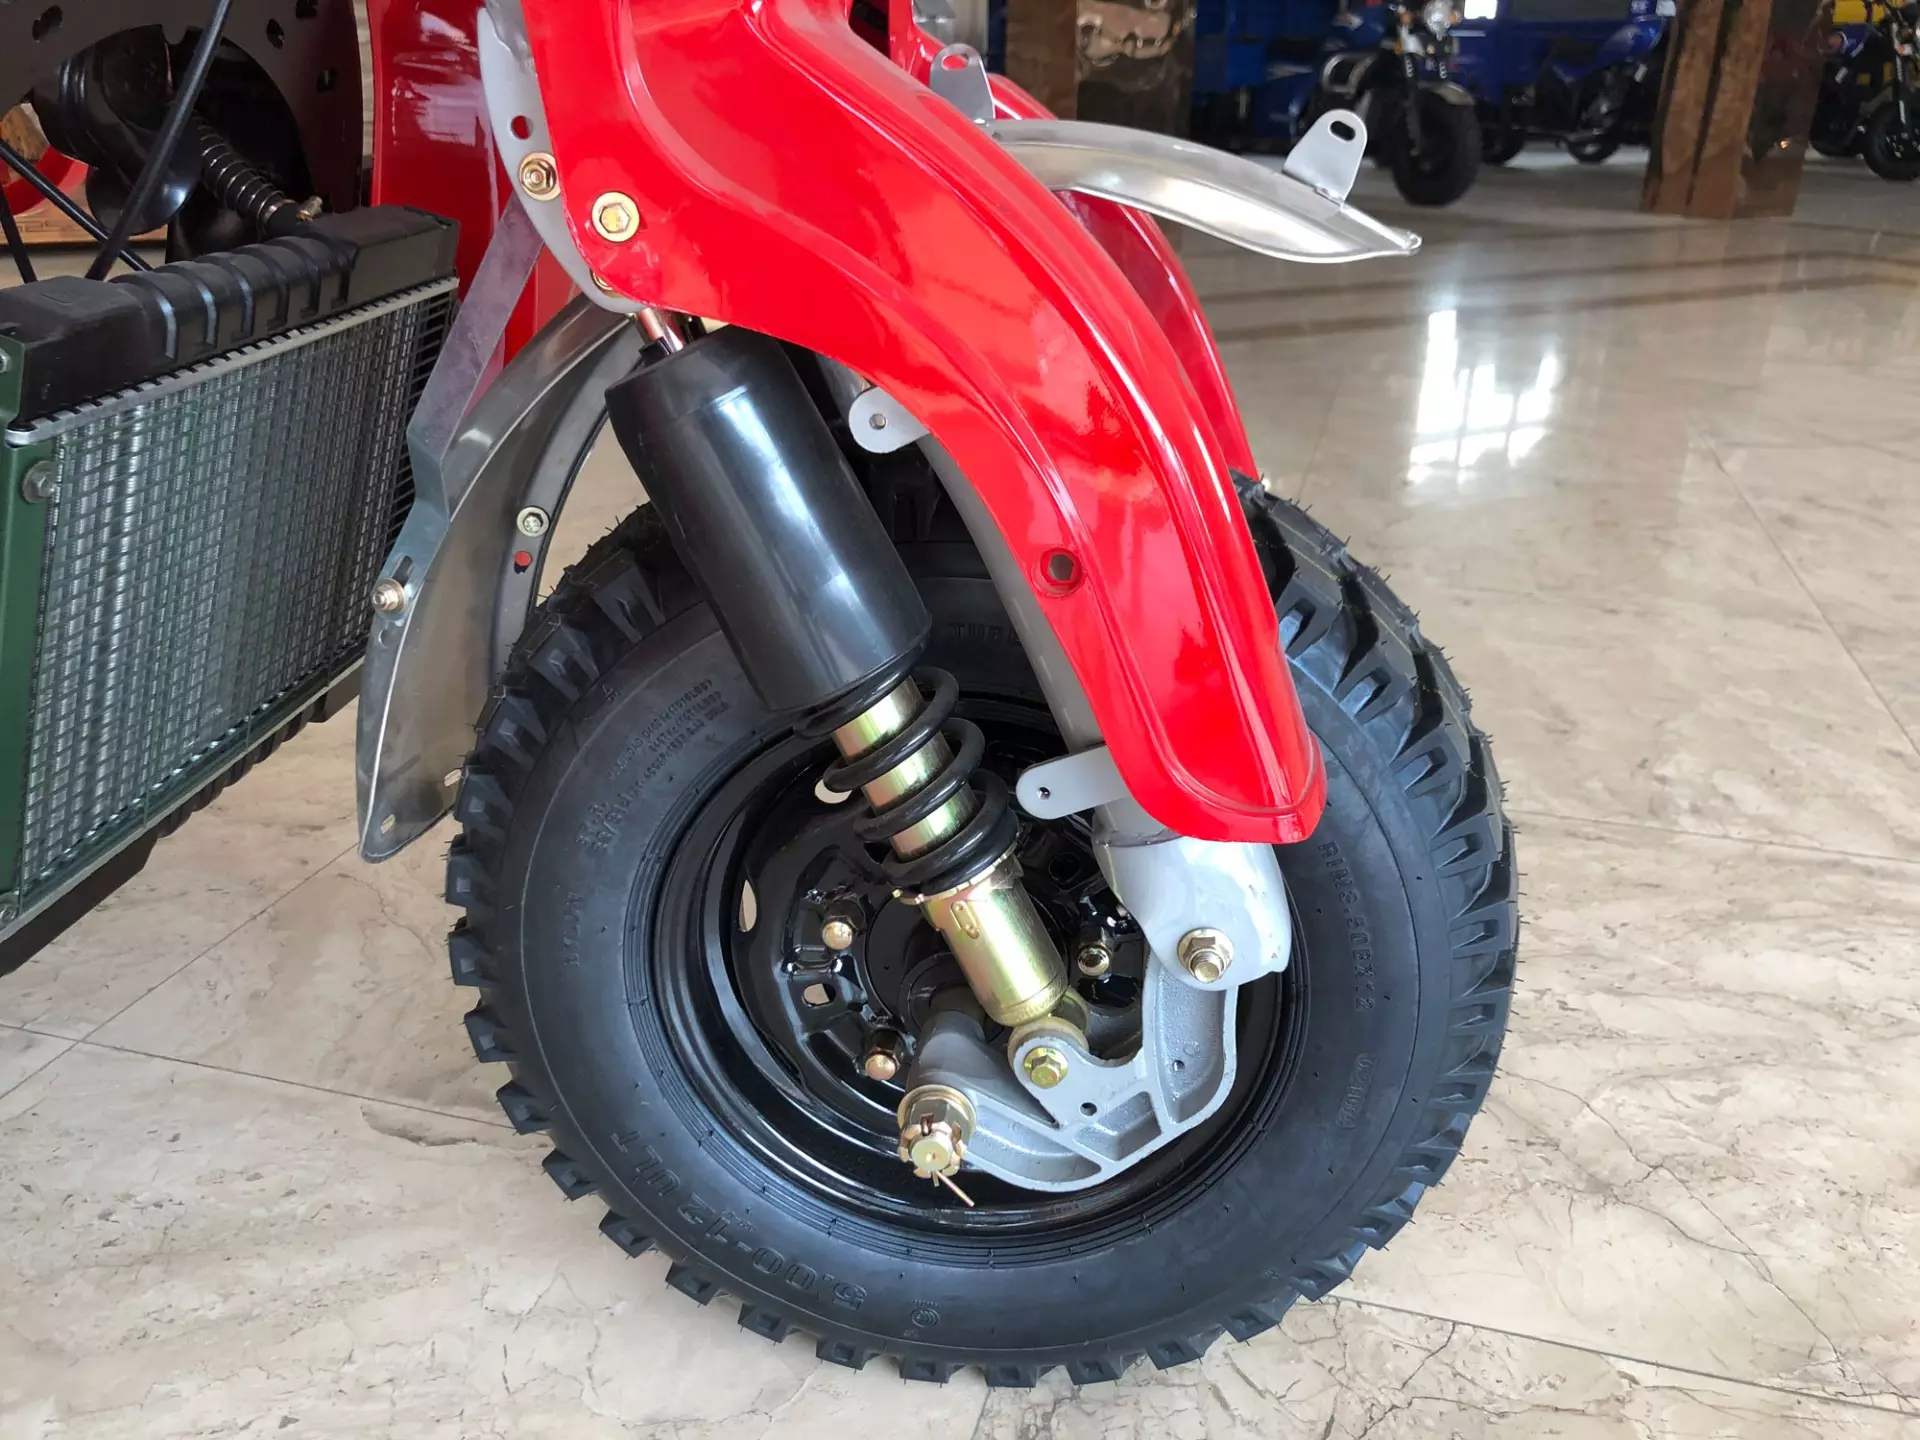 DAYANG brand new well high cost performance selling tricycle motors gh motor tricycle cargo